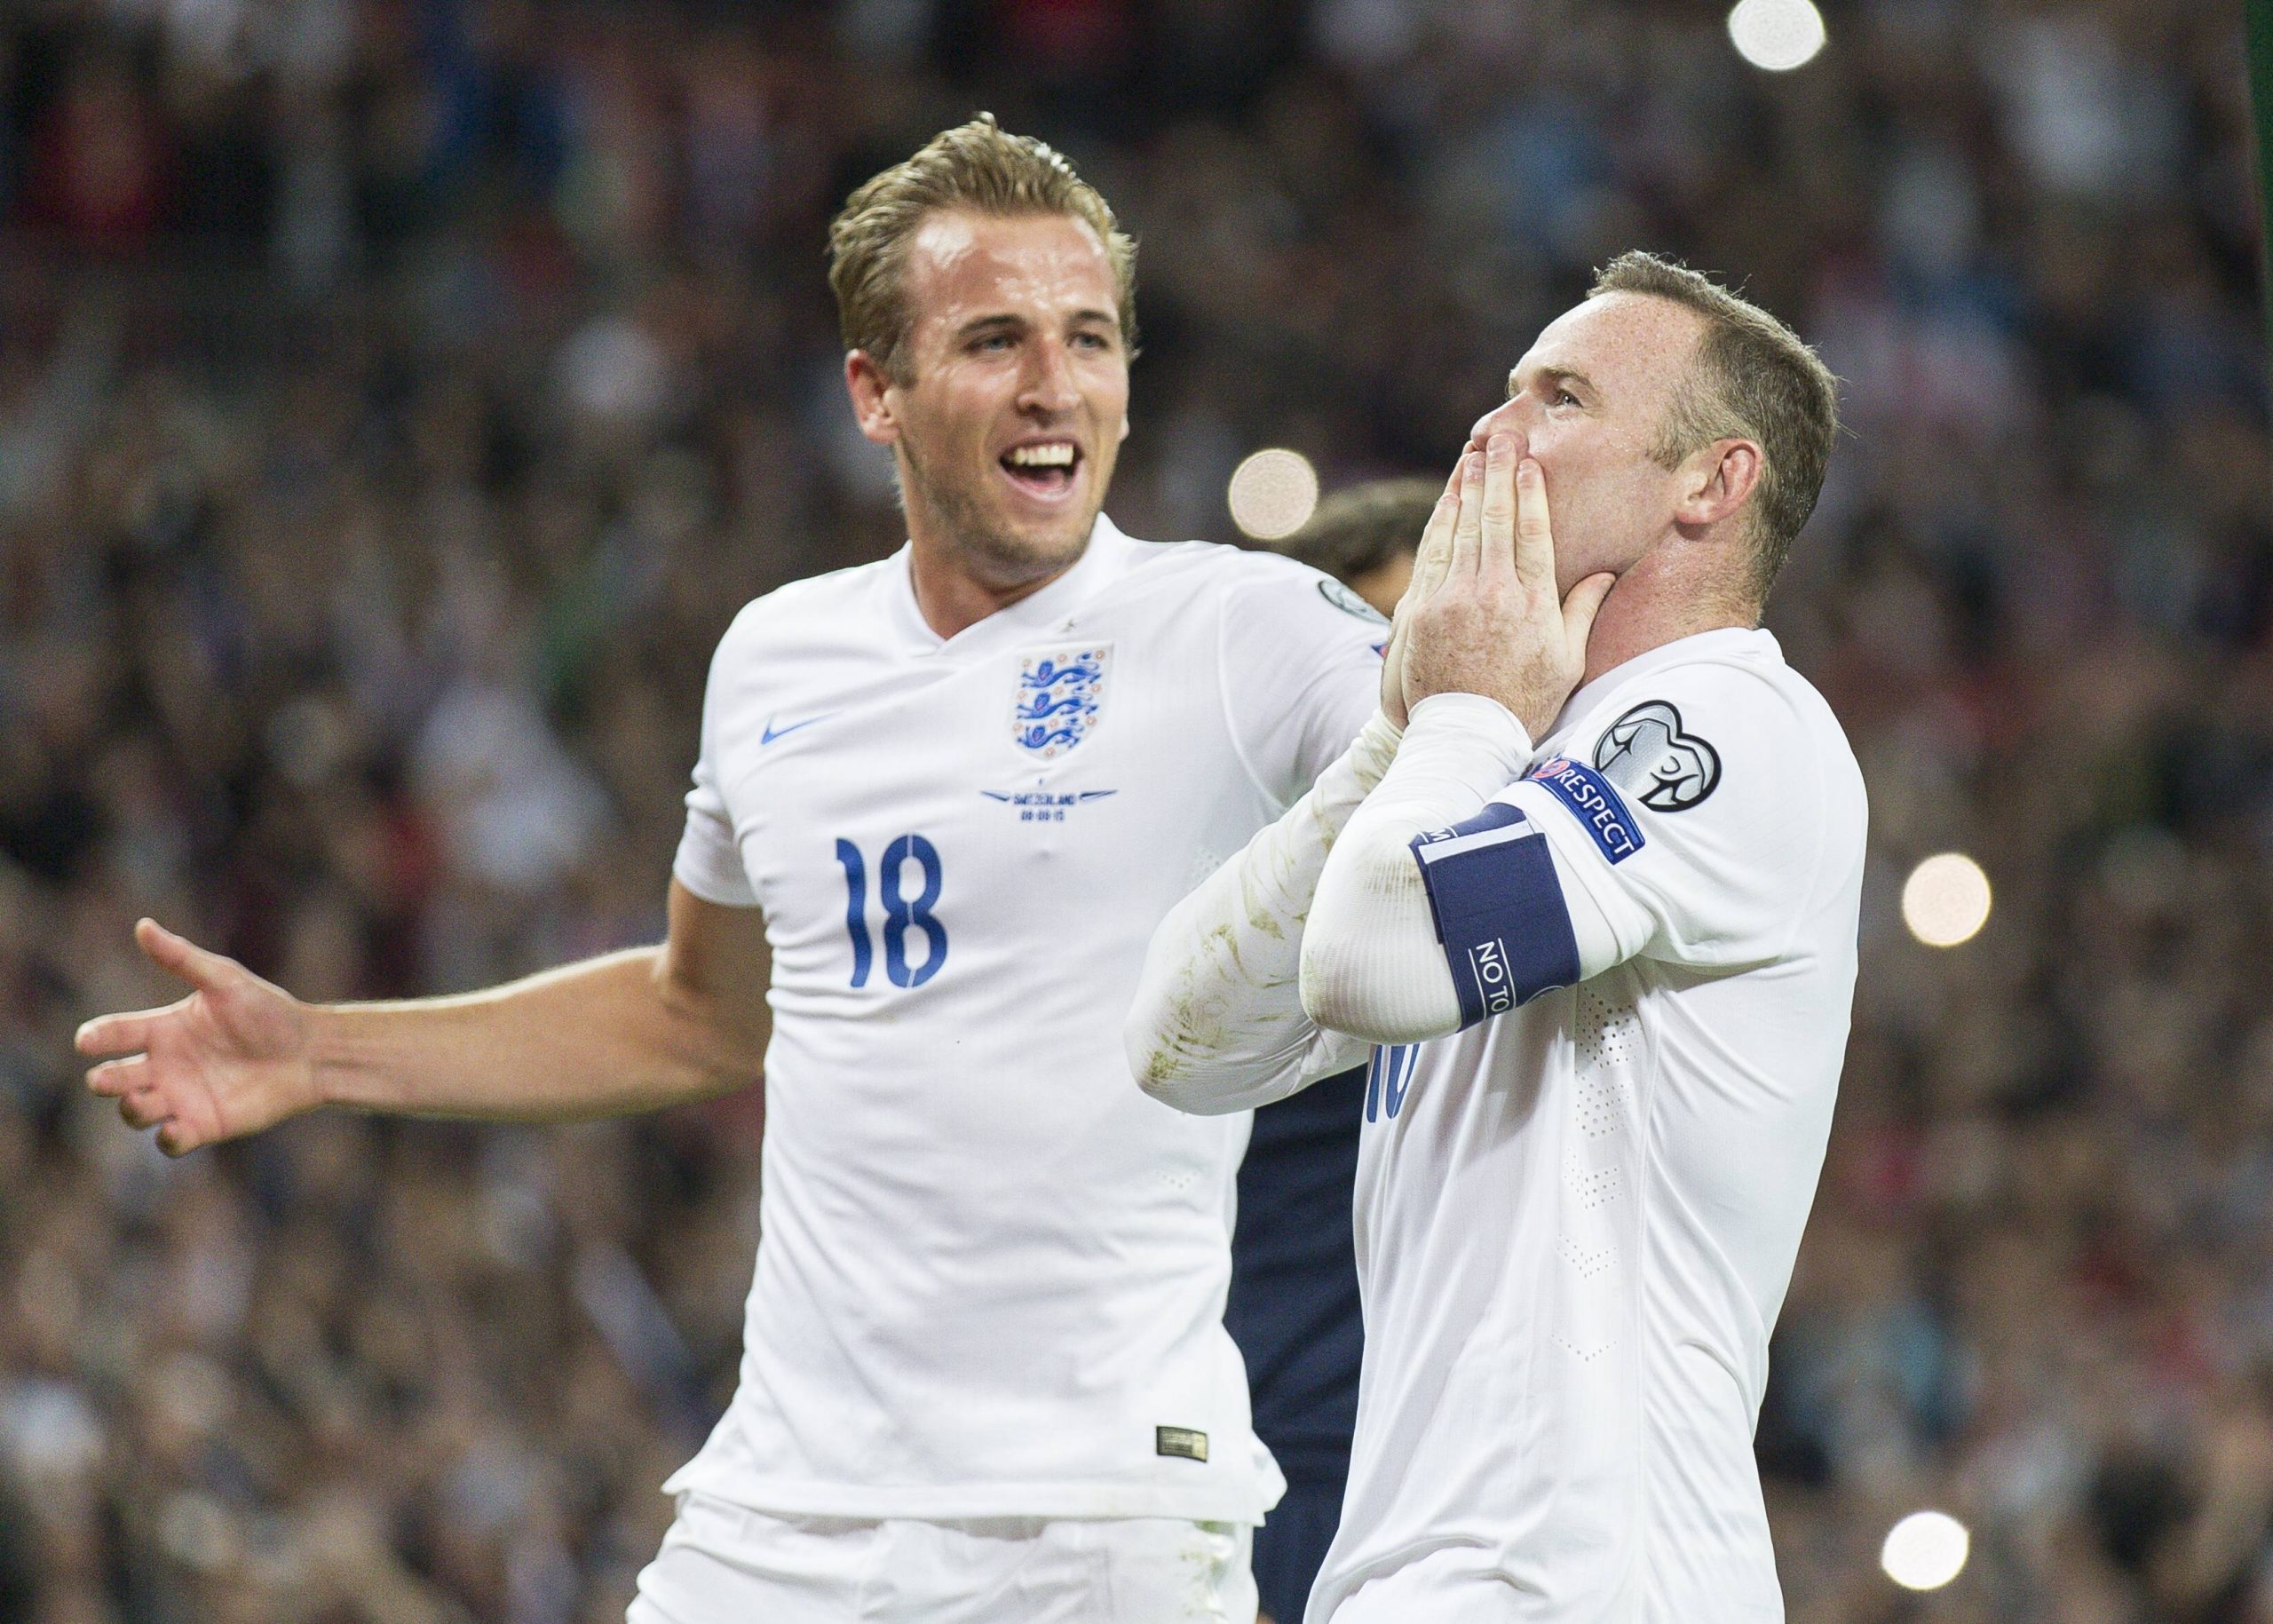 England s Harry Kane rushes in to congratulate team mate Wayne Rooney after he scored the goal that broke the England goals record